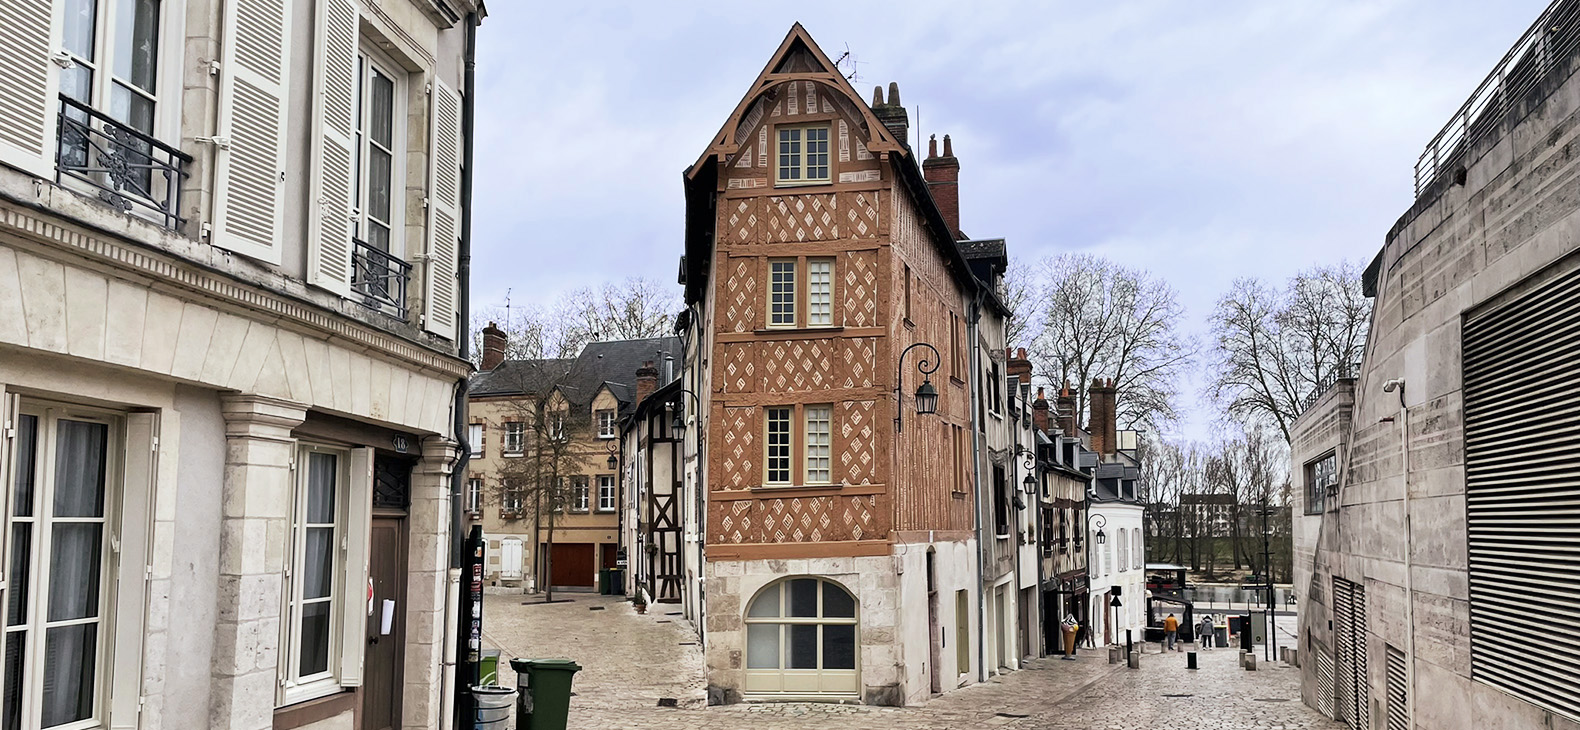 Residence Program Schafhof / District of Upper Bavaria: Focus /> Orléans; Image: Downtown Orléans, street with half-timbered houses, cobblestones and white clouds against a blue sky.